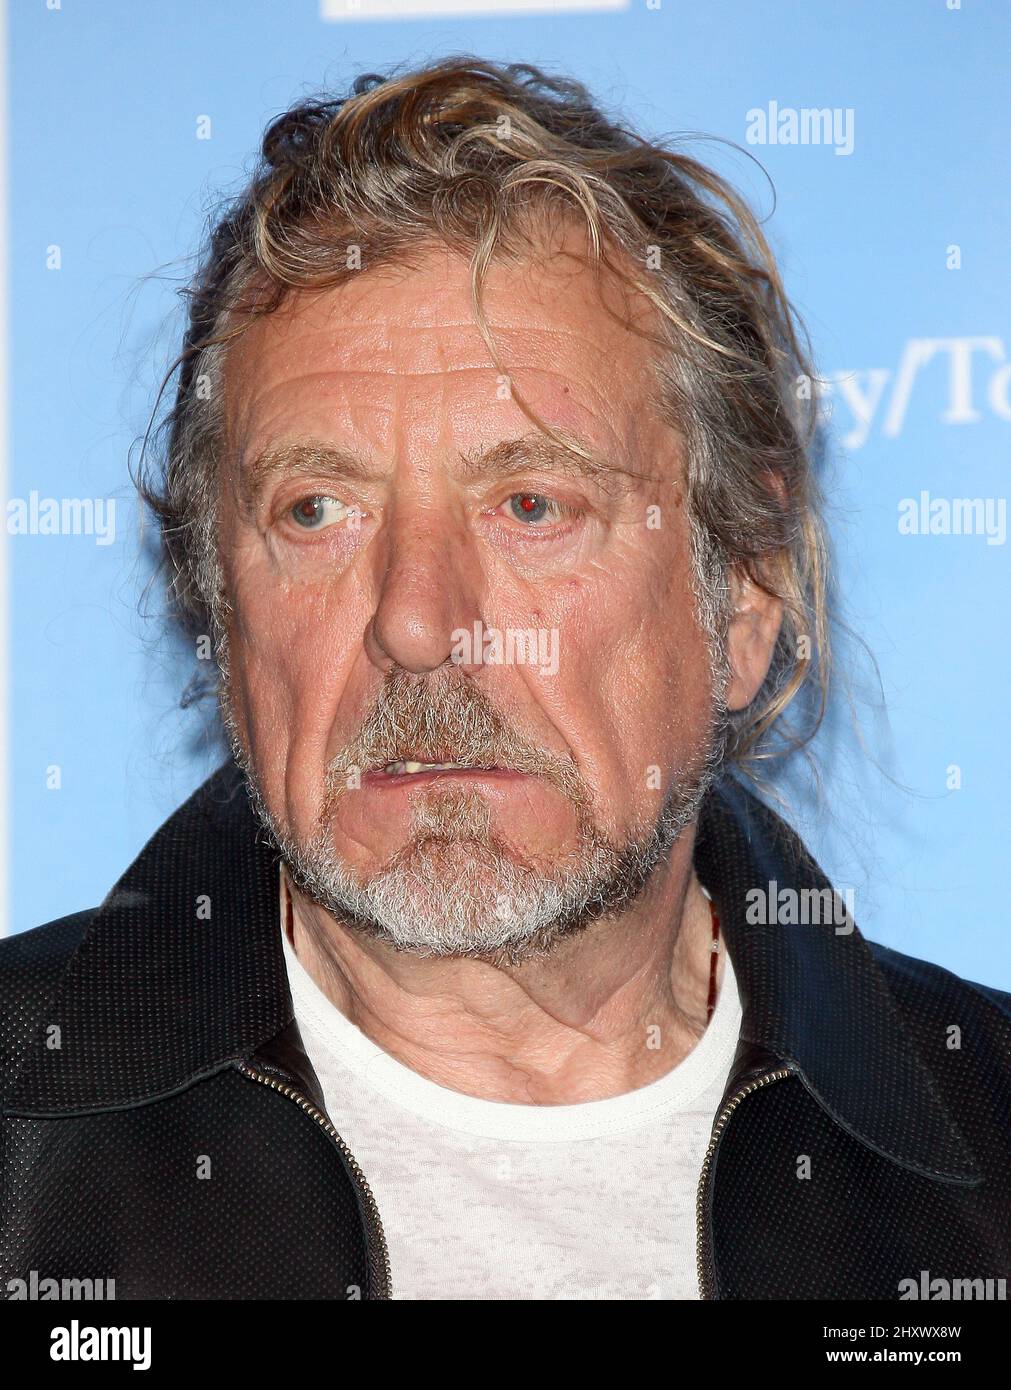 Robert Plant at a news conference at the Ronald Reagan UCLA Medical Center in Los Angeles. Daltrey and Plant pledged to raise money to renovate part of the hospital pediatric floor into a separate space for patients ages 15 to 24 Stock Photo